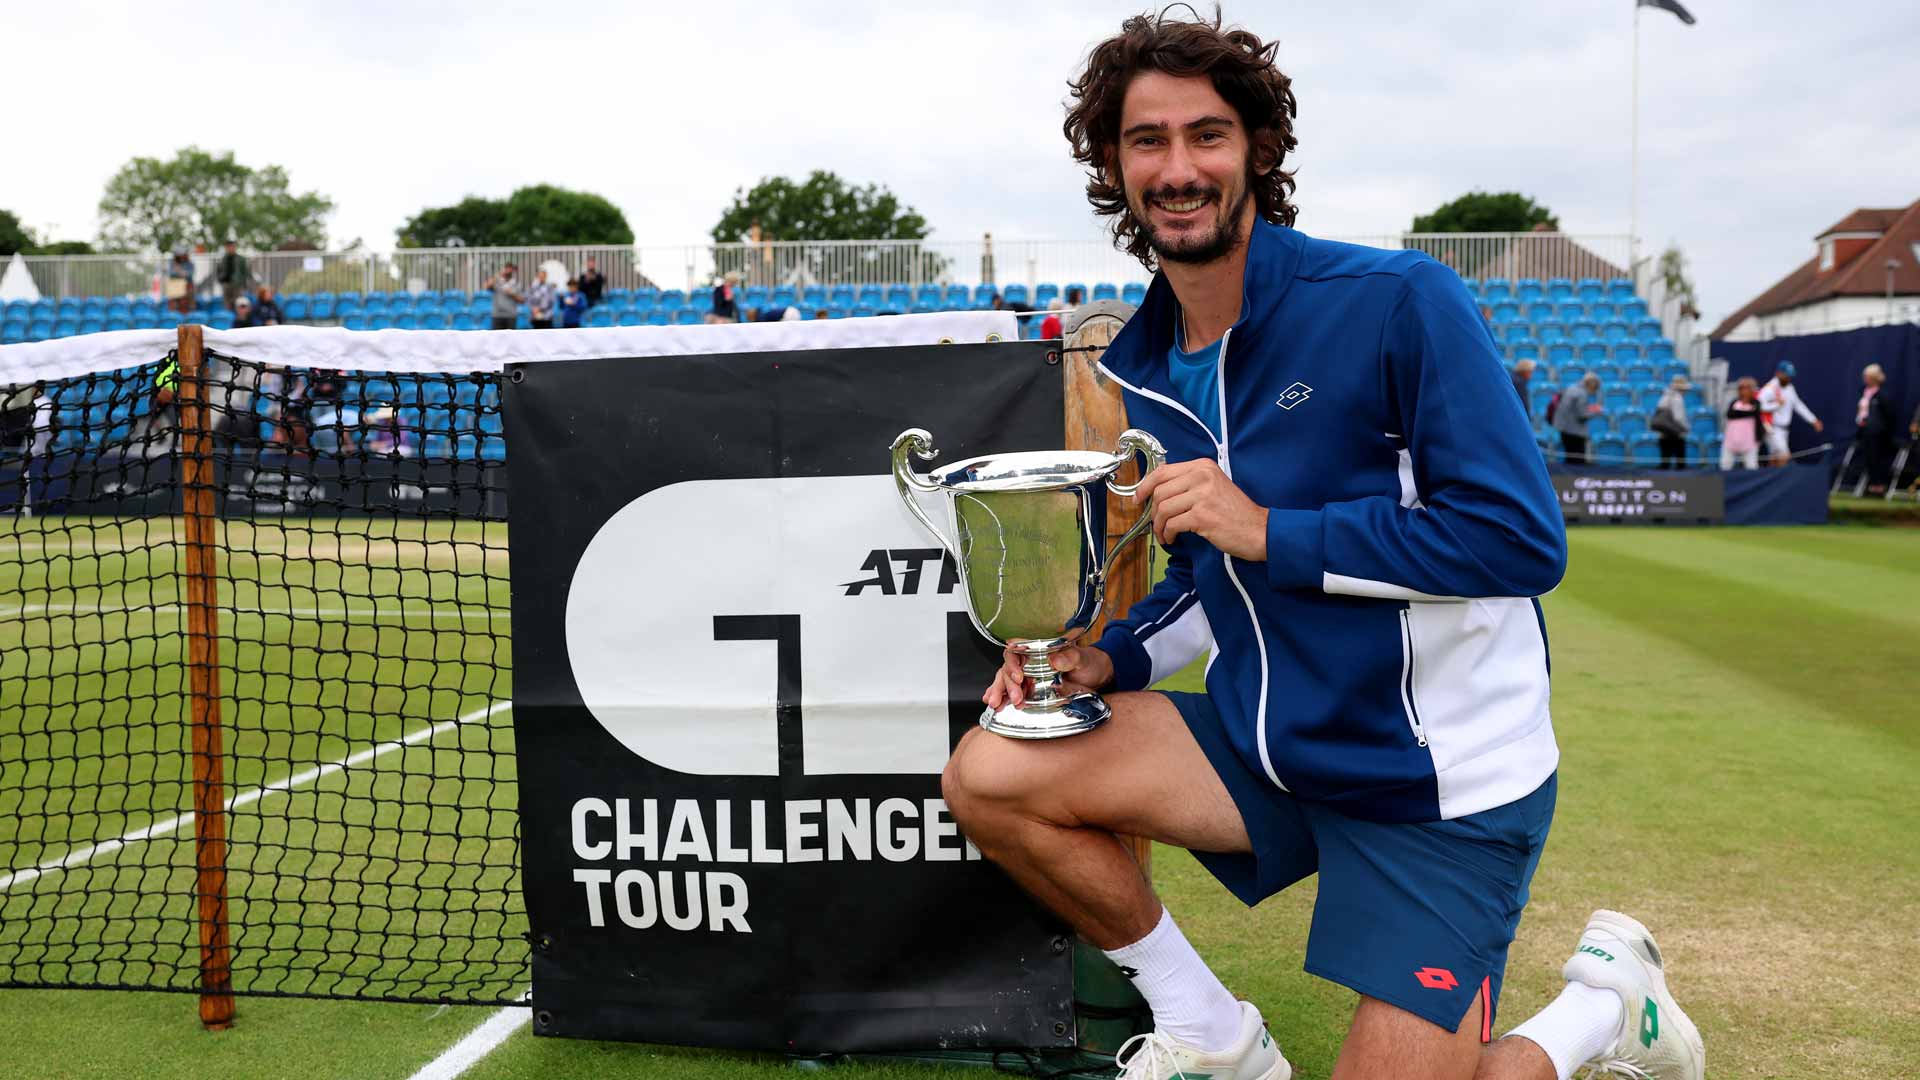 <a href='https://www.atptour.com/en/players/lloyd-harris/hg86/overview'>Lloyd Harris</a> wins his first grass-court title and sixth ATP Challenger Tour crown in Surbiton.